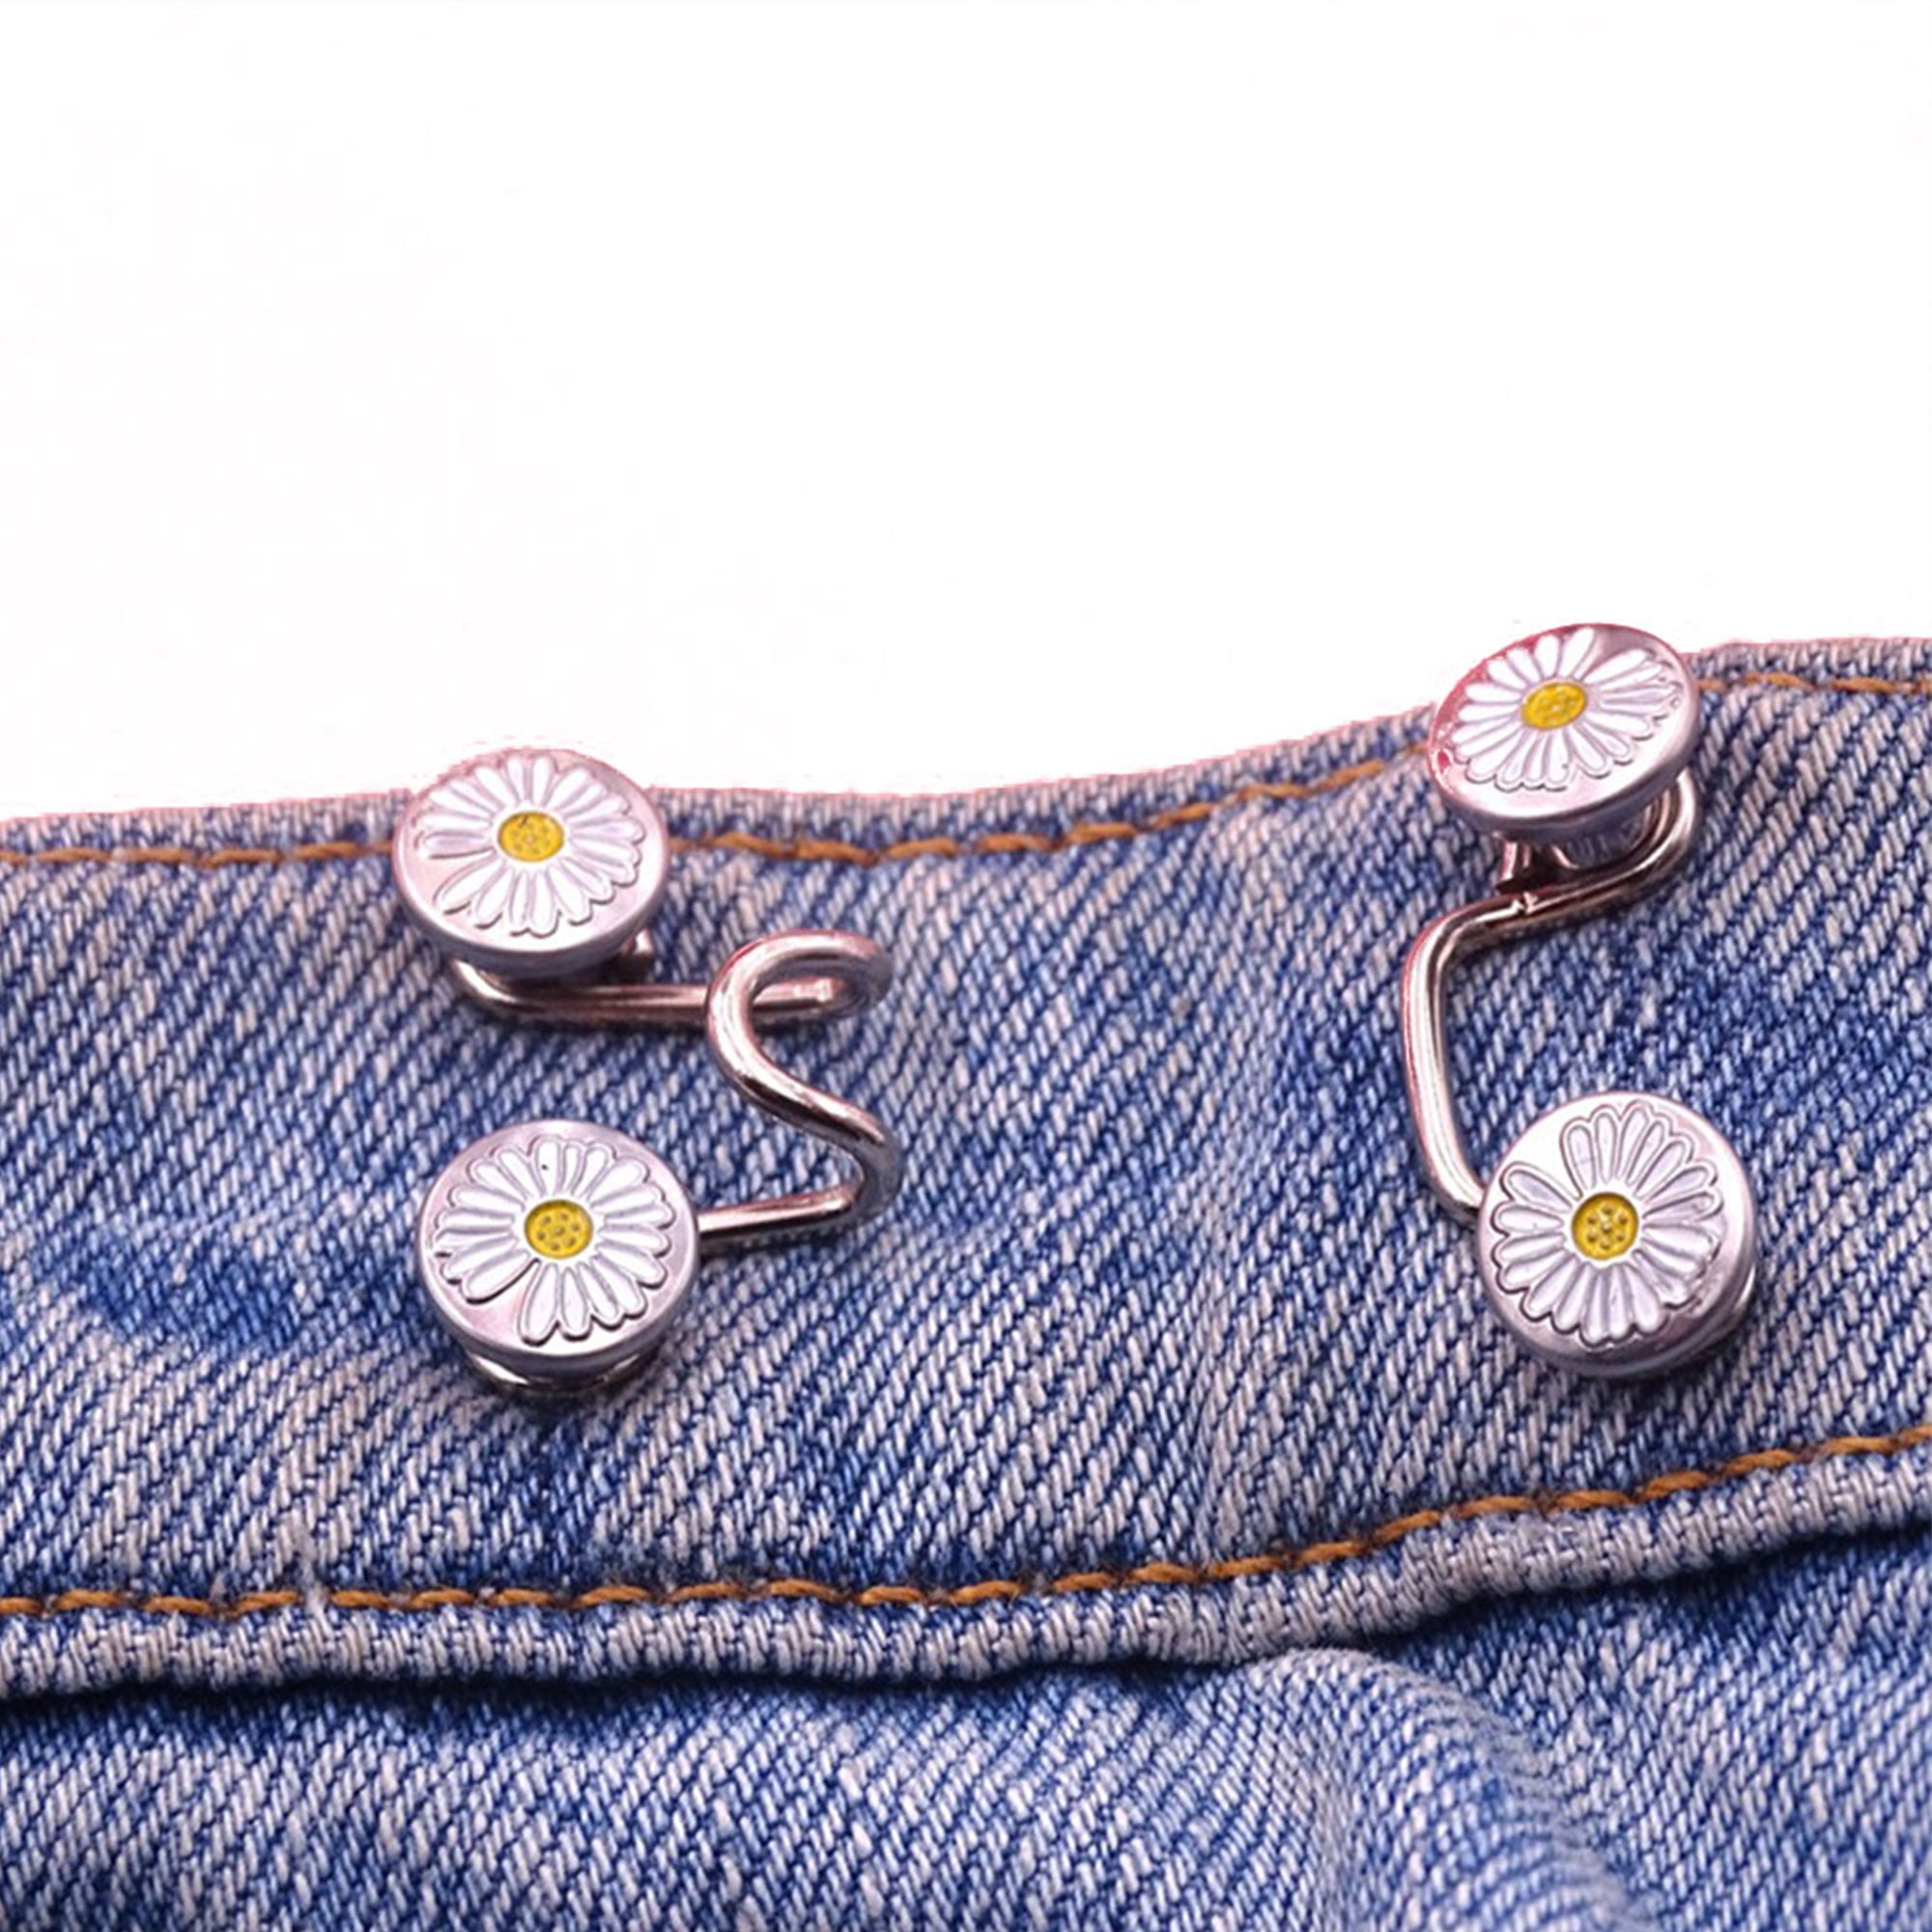 Jeans Buttons The Side